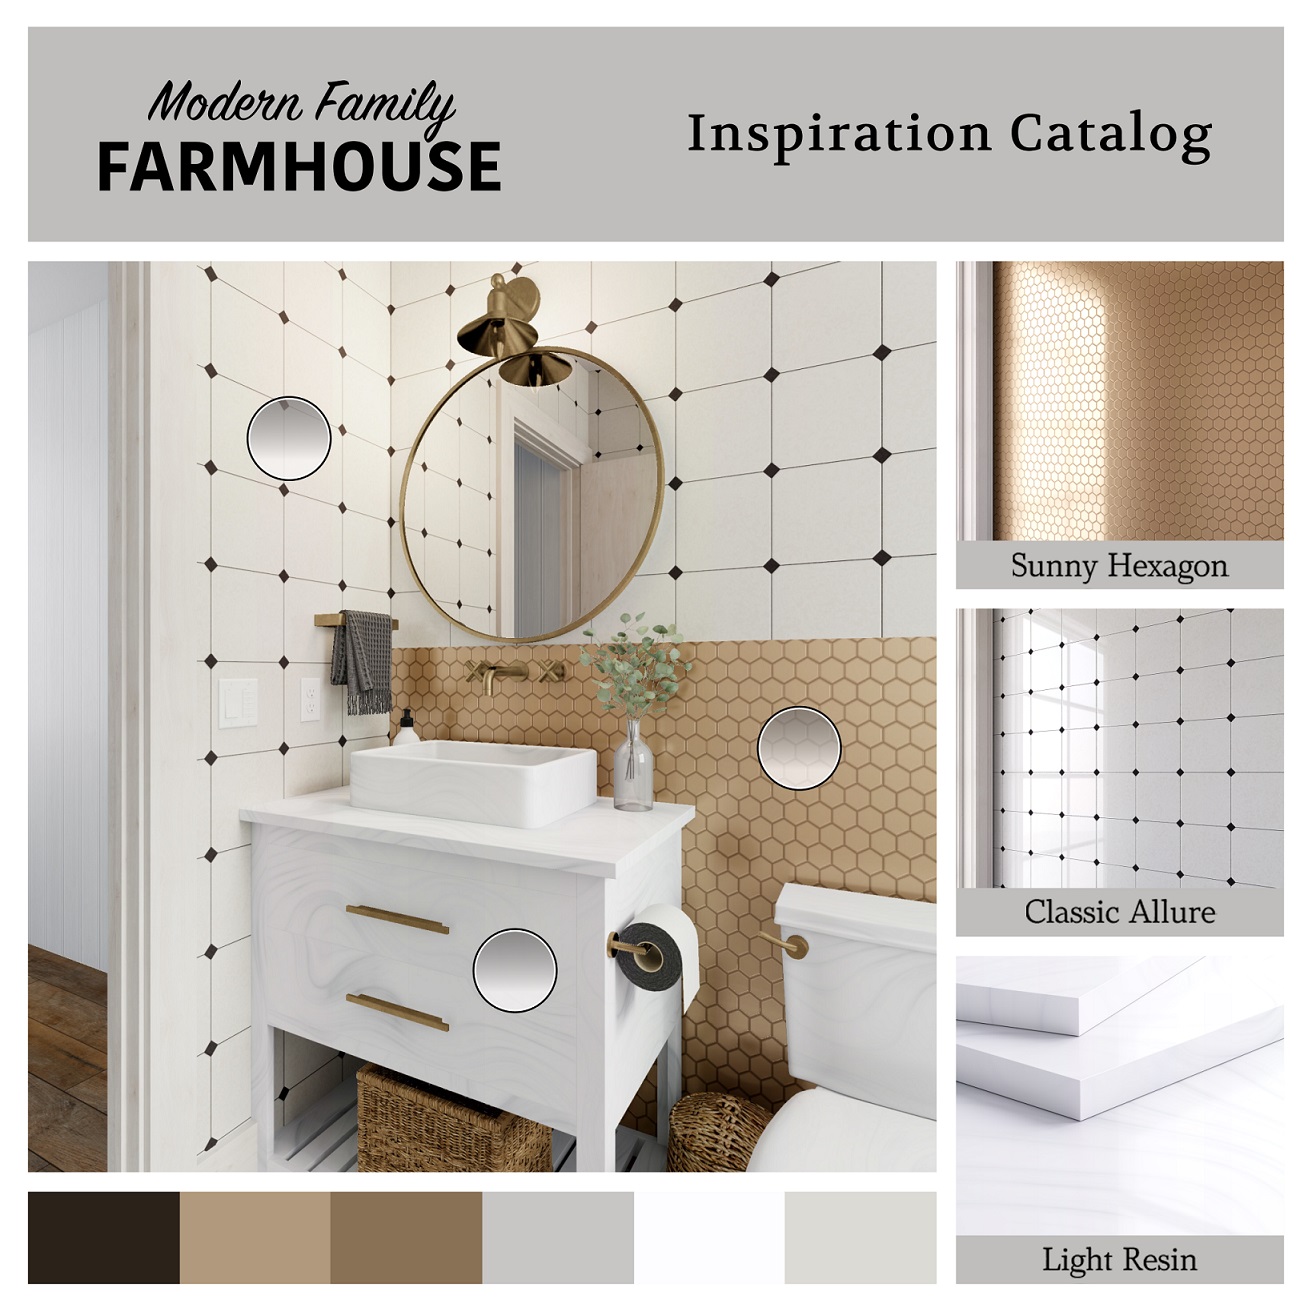 Bathroom picture from the Redecor Style Guide for Farmhouse Season